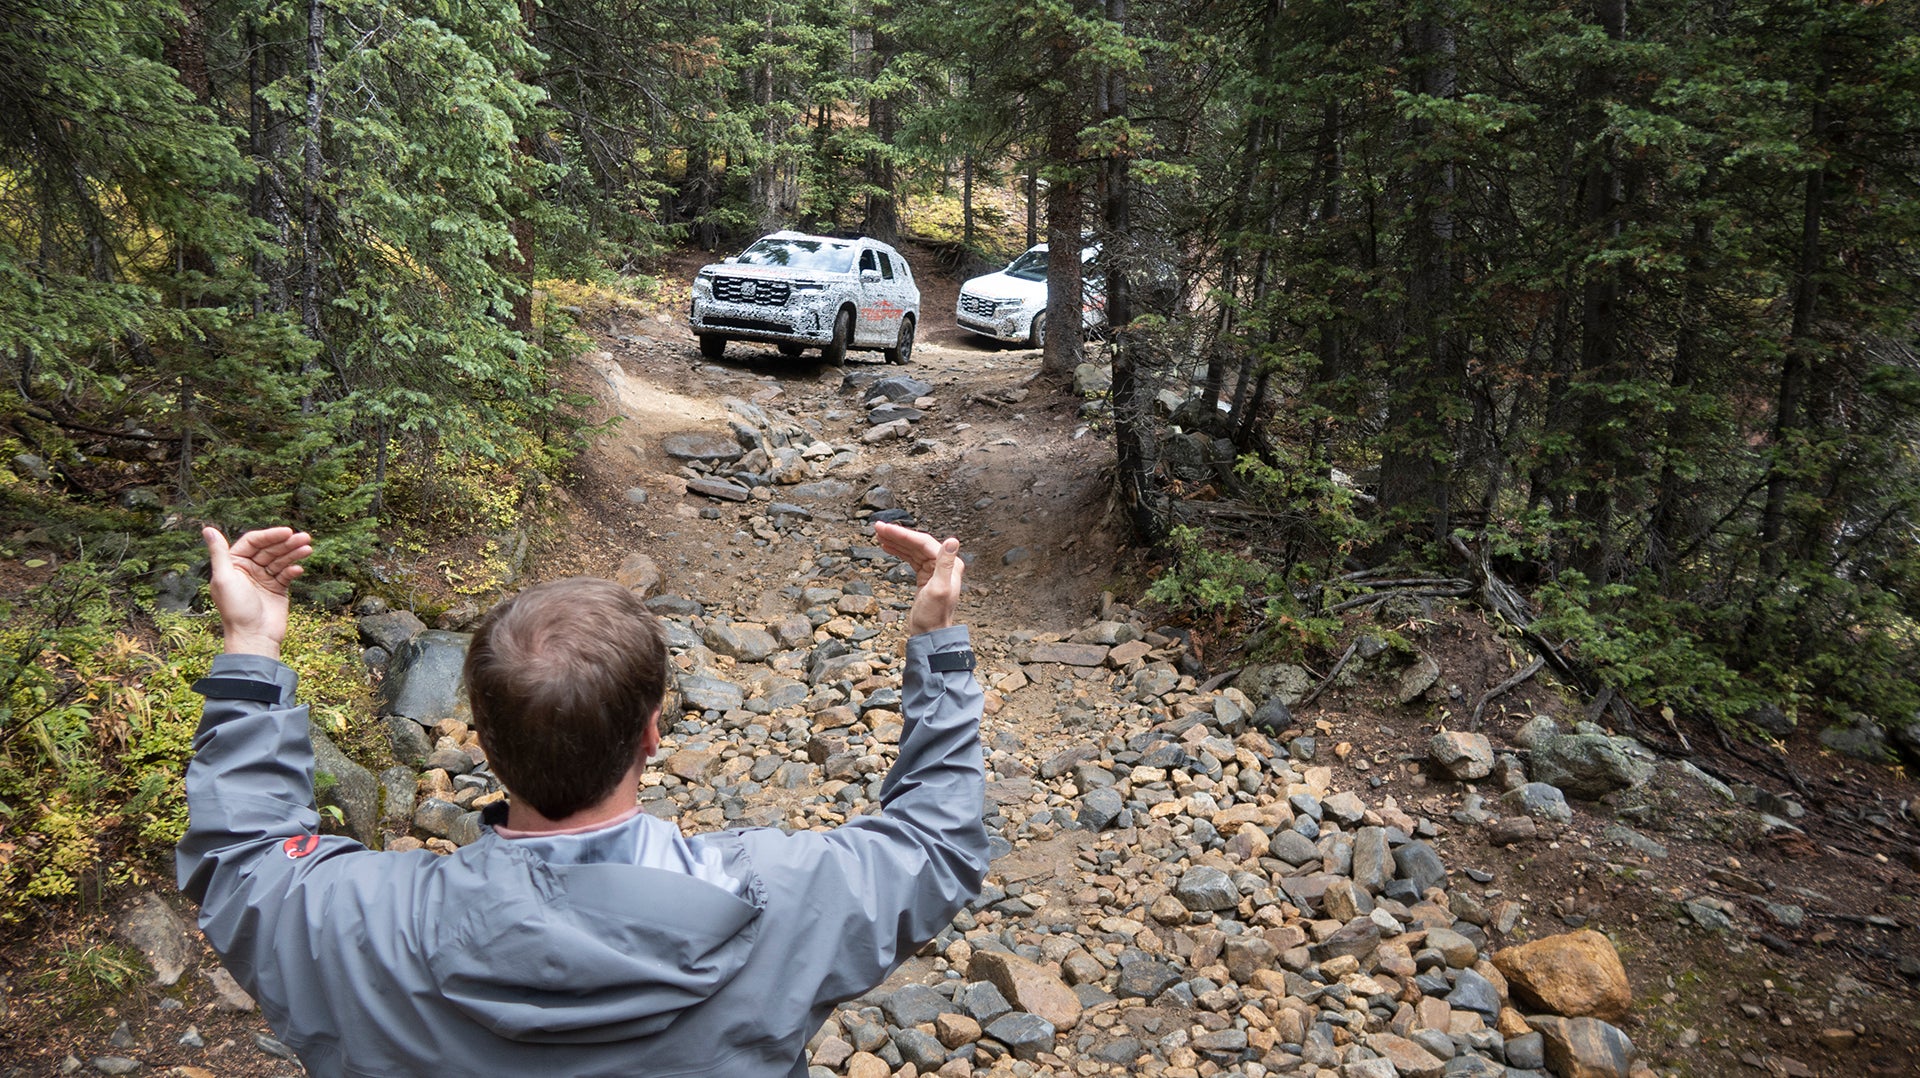 2023 Honda Pilot TrailSport being directed on a trail by a spotter.